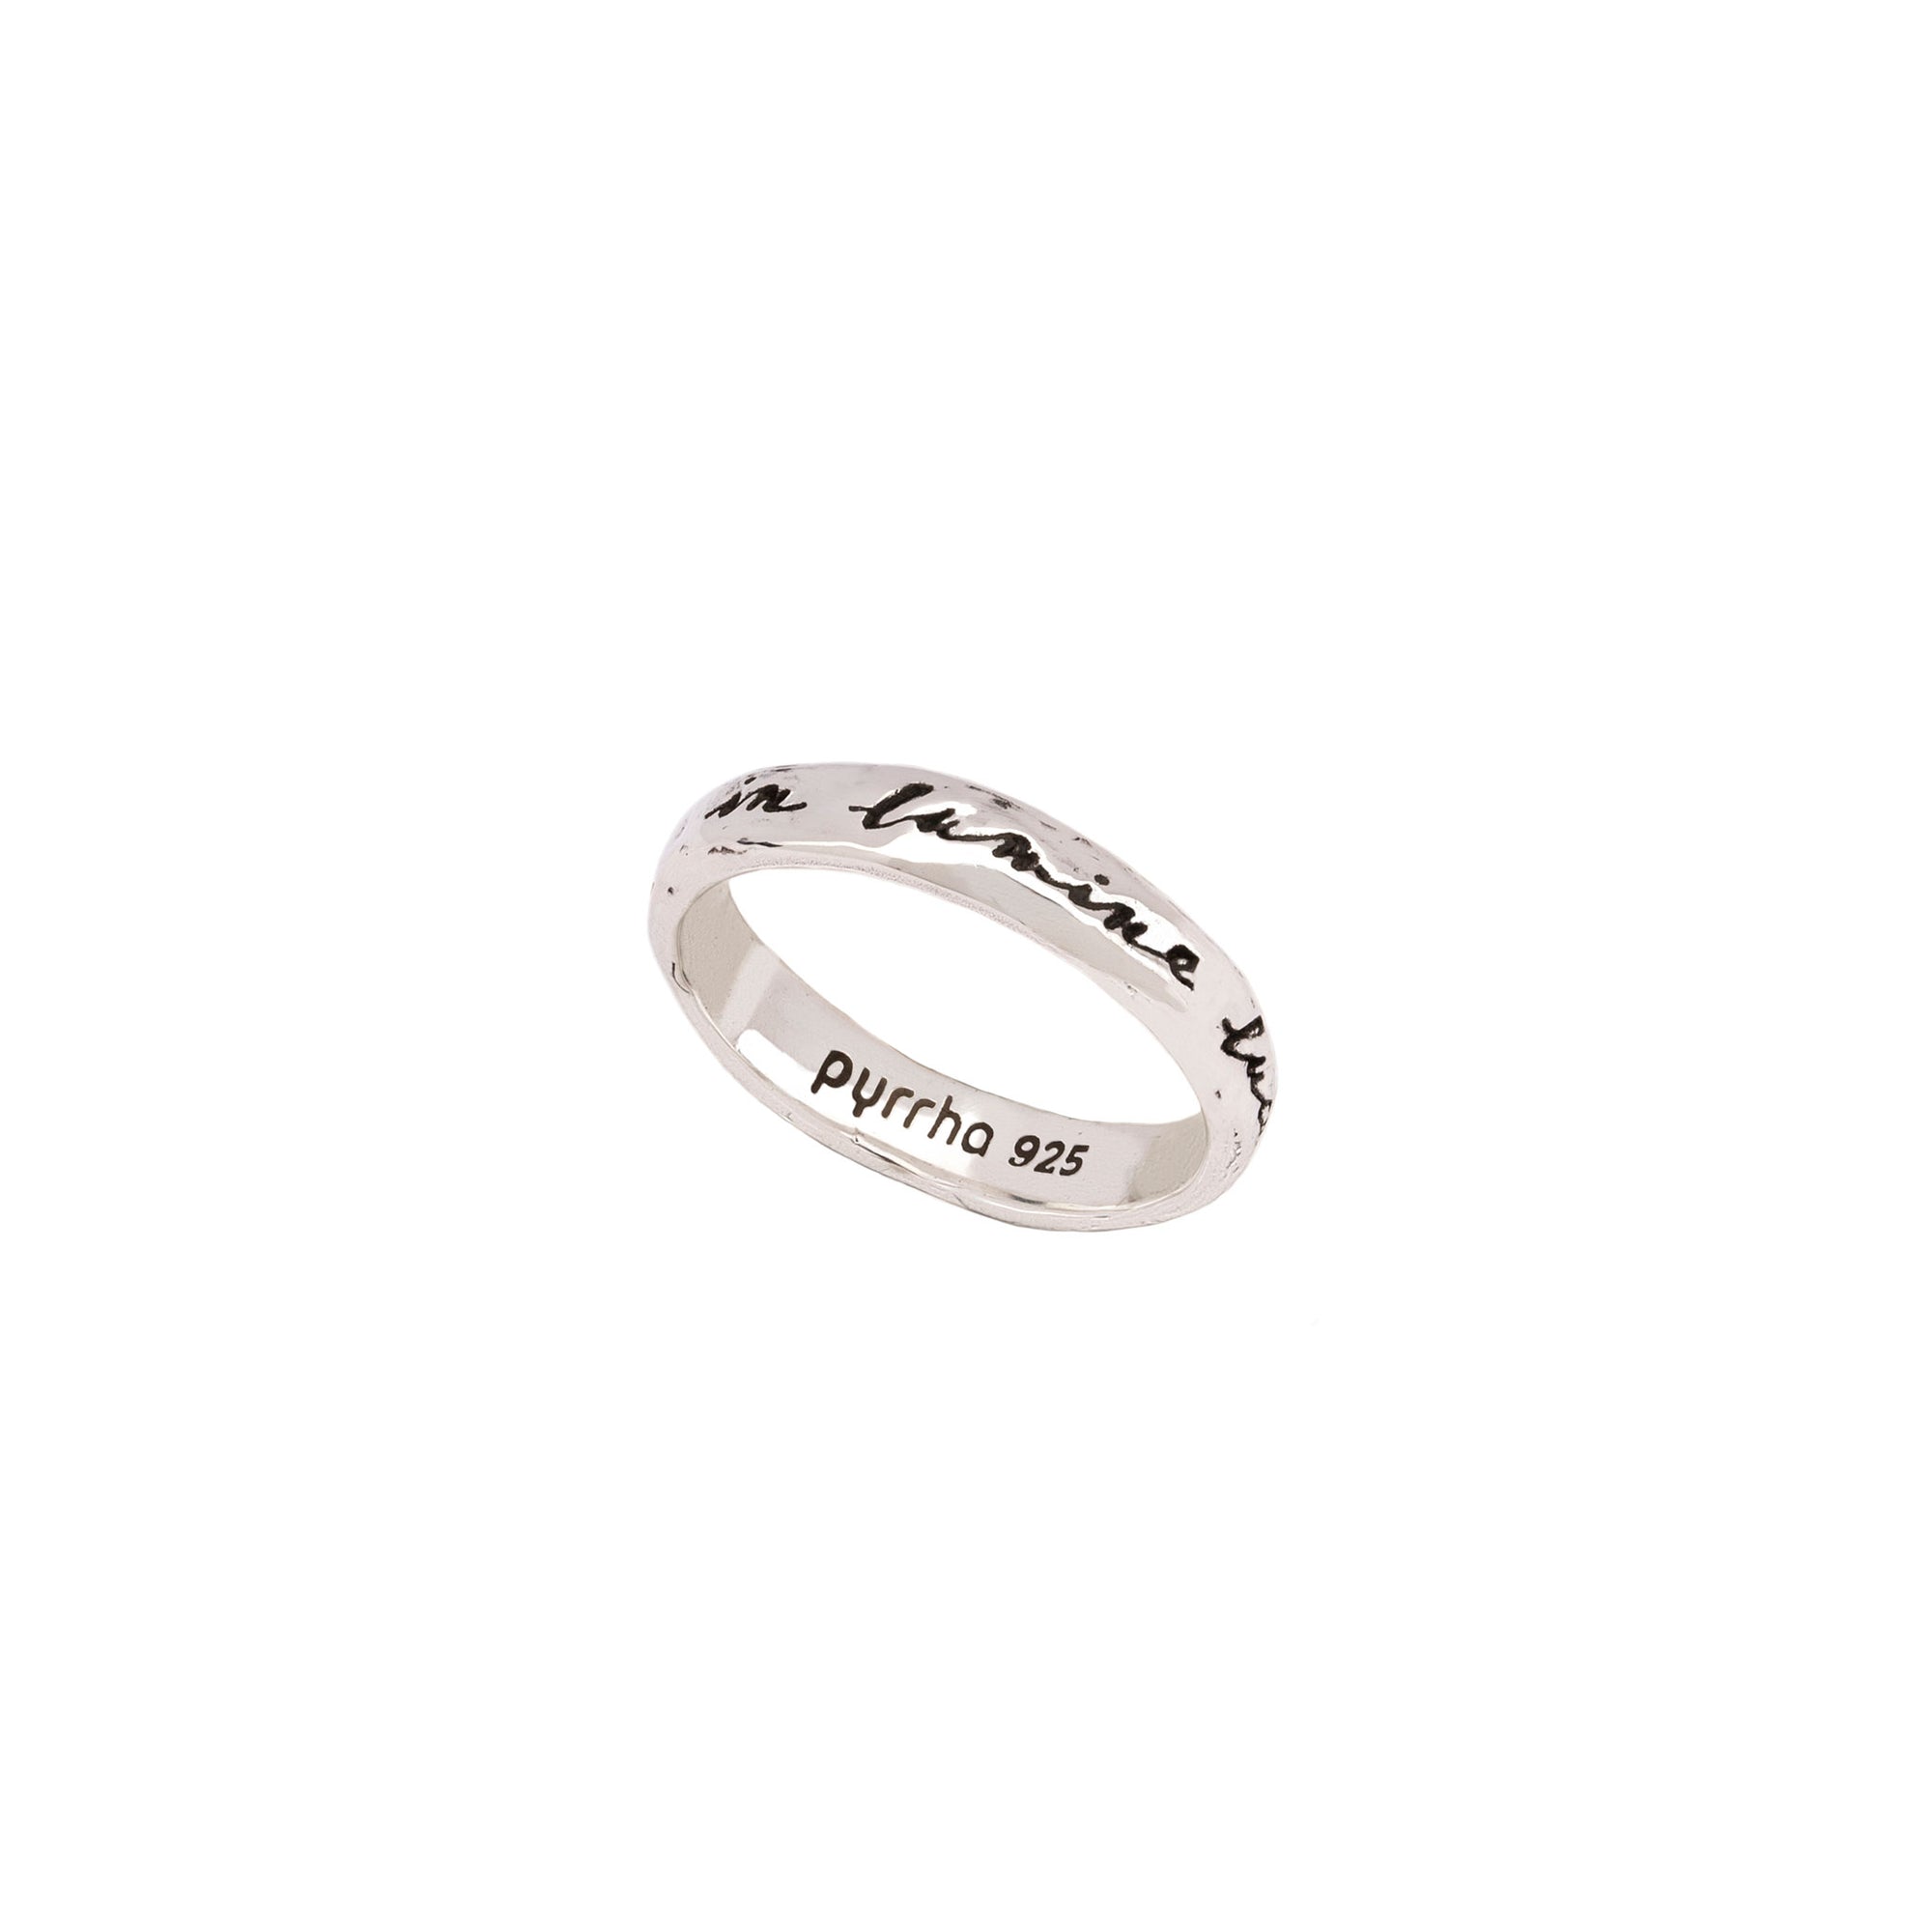 An engraved silver band ring representing those who shine in the light